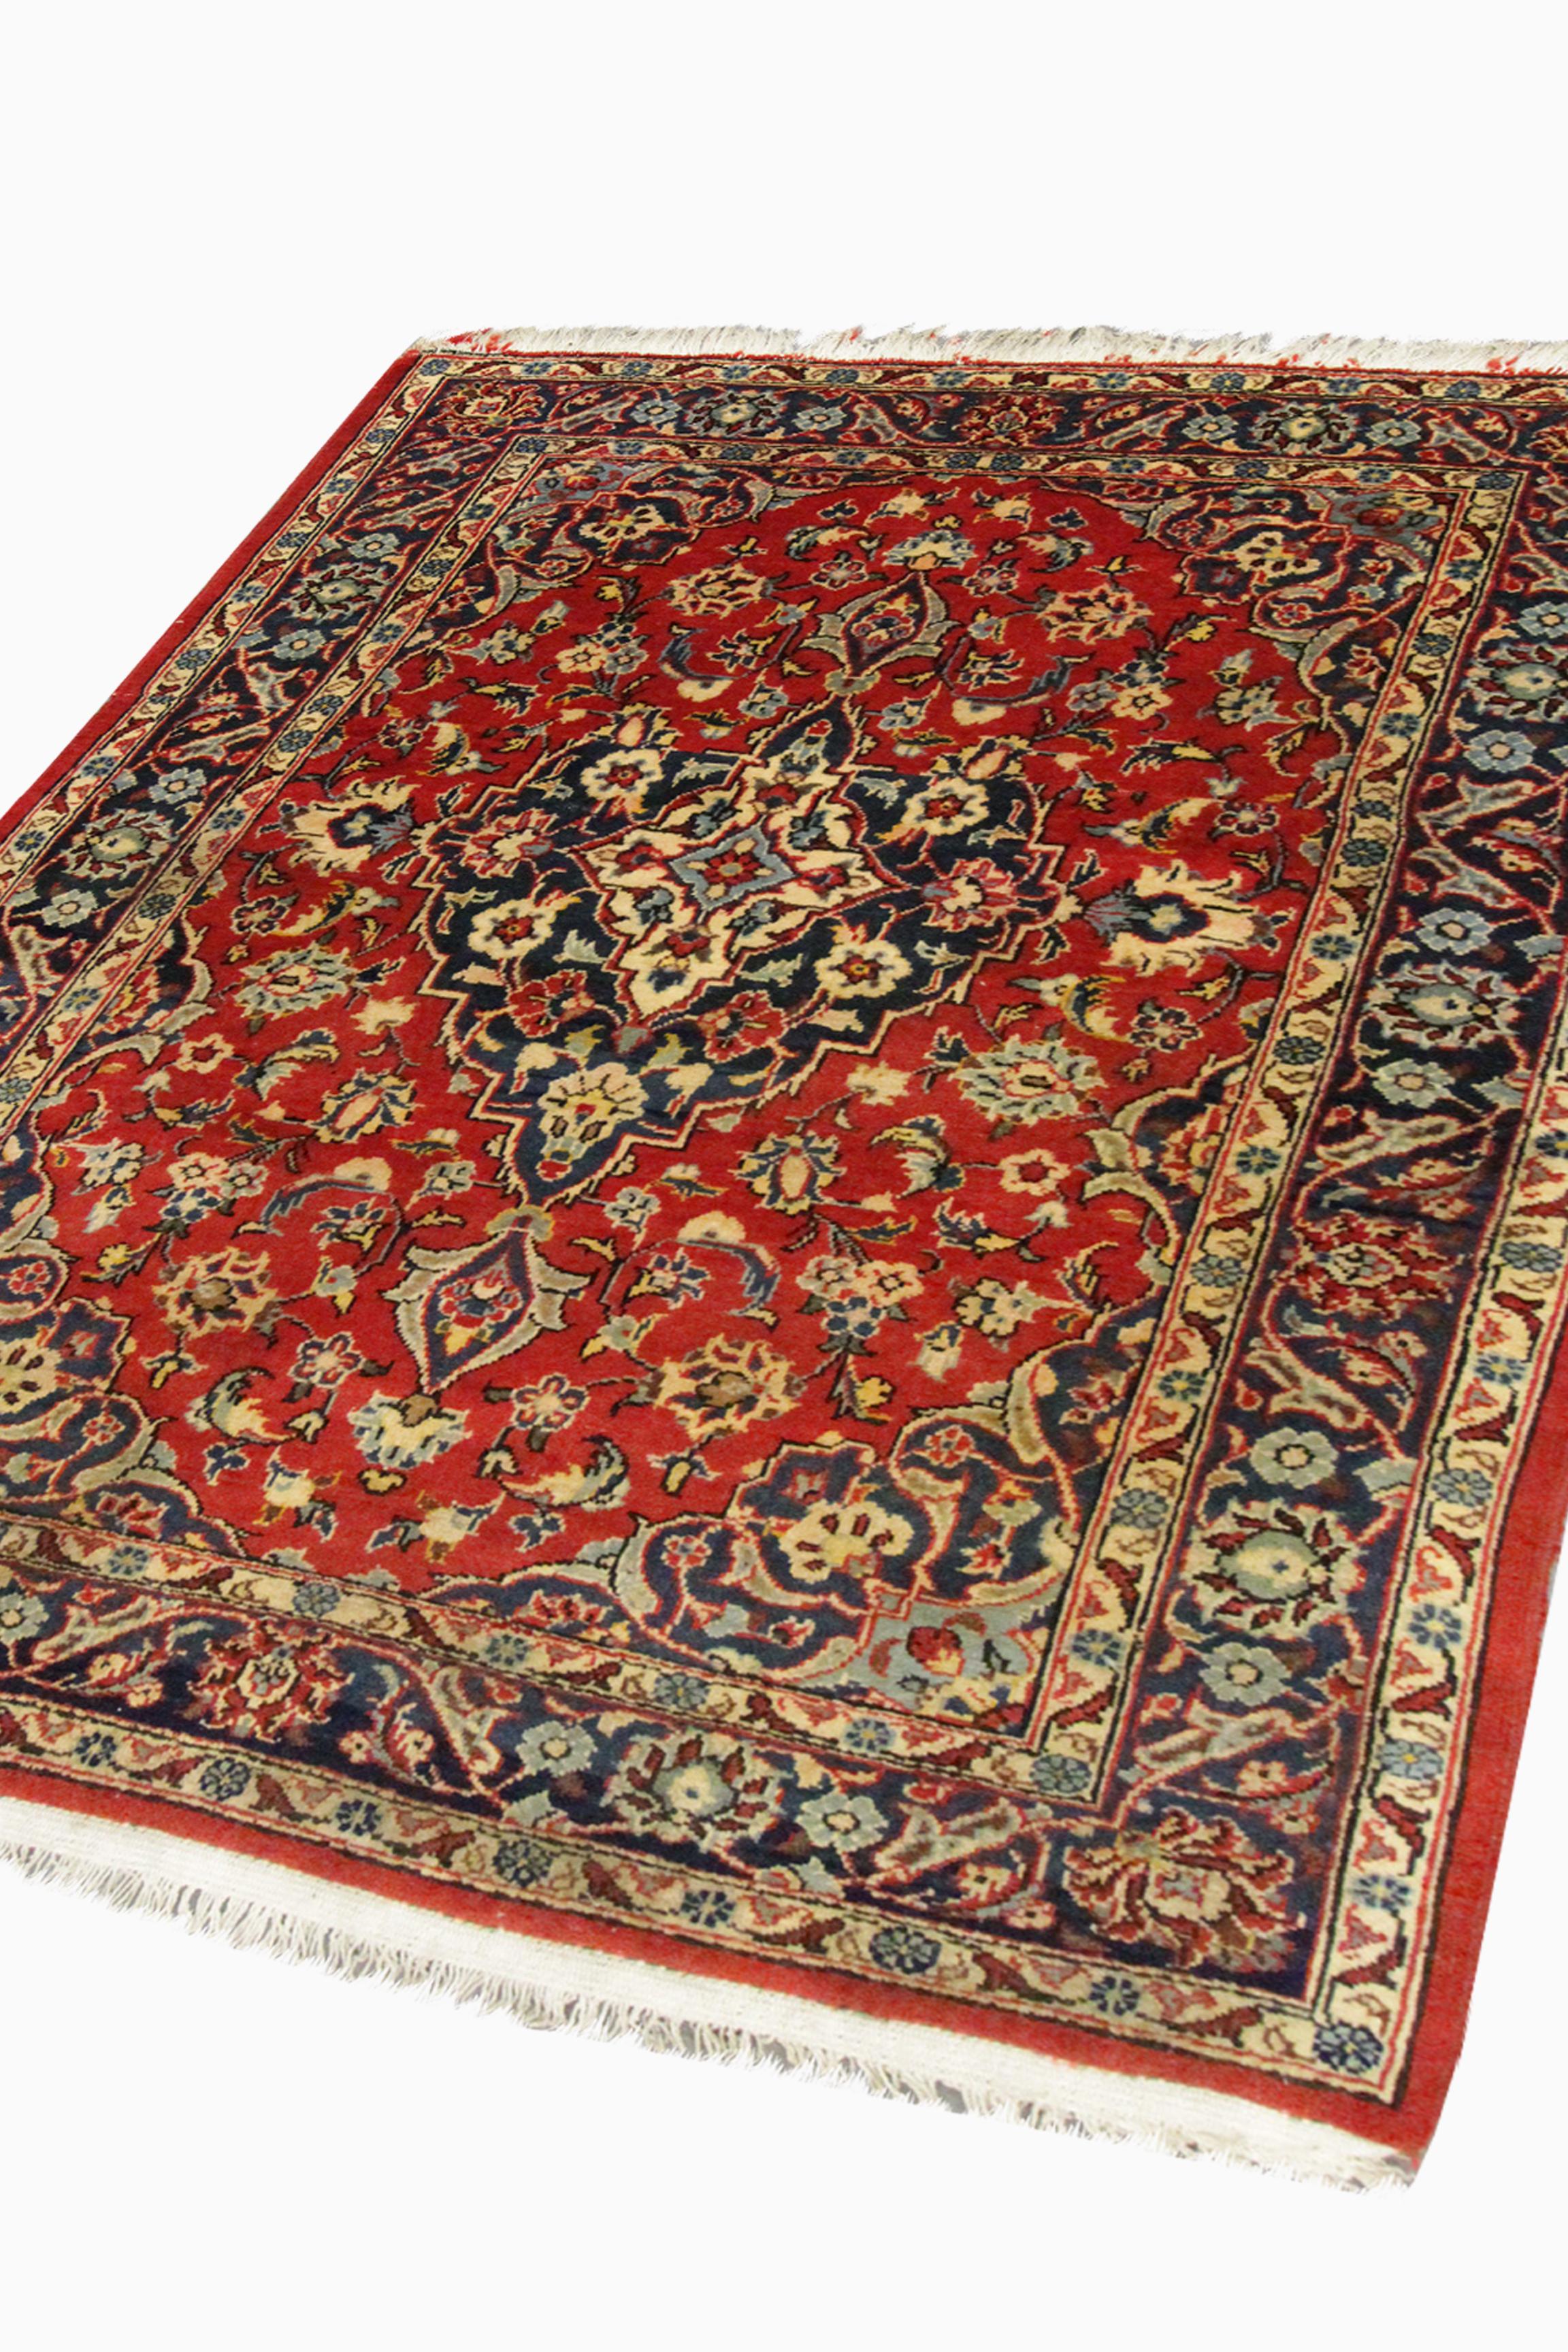 Arts and Crafts Small Living Area Rug Handwoven Red Oriental Wool Carpet Traditional For Sale